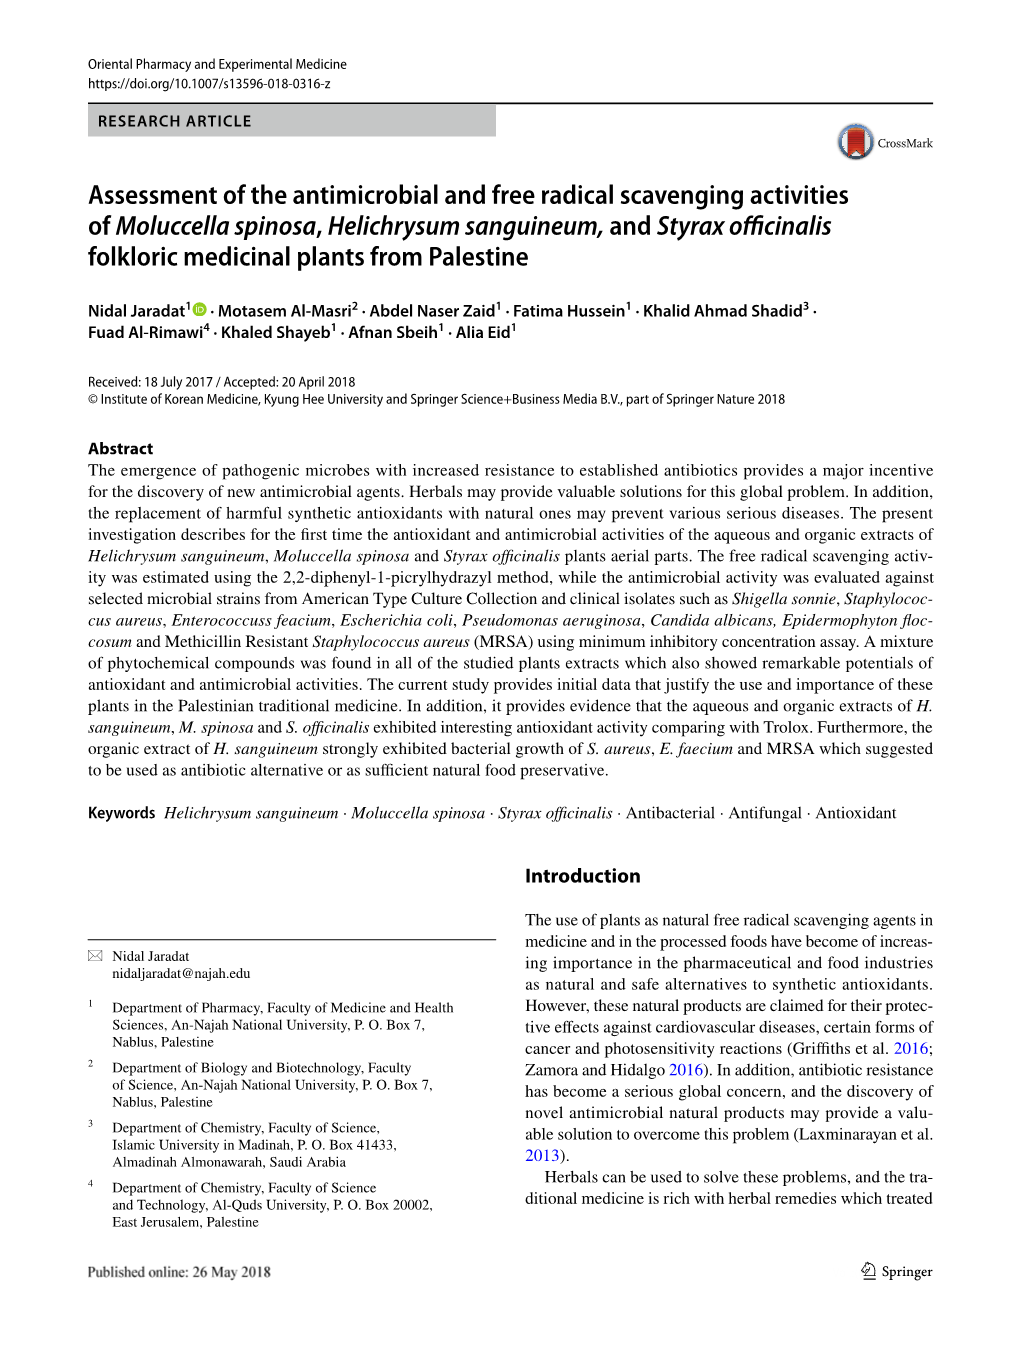 Assessment of the Antimicrobial and Free Radical Scavenging Activities Of